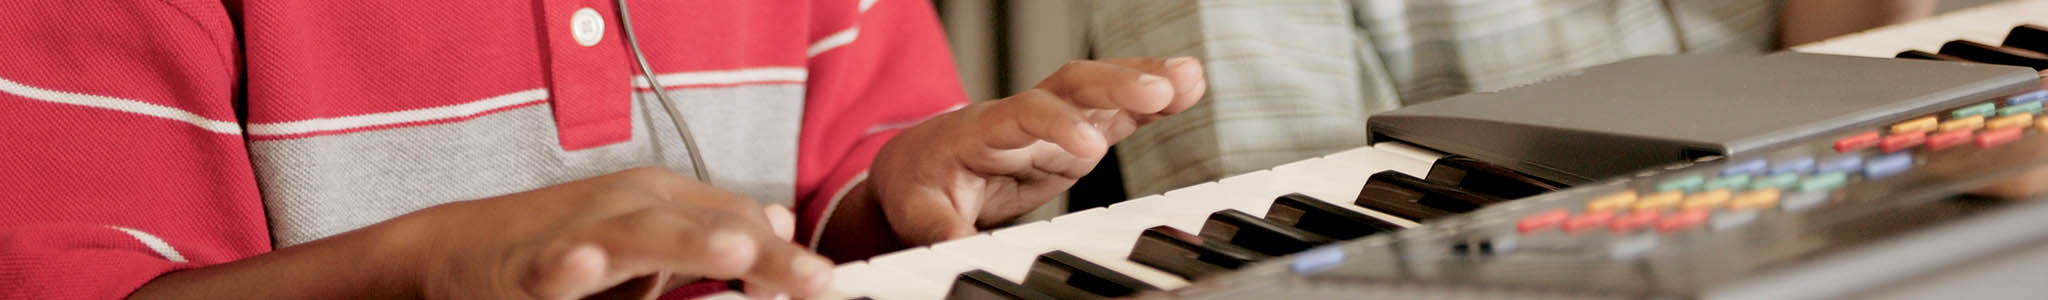 Students playing keyboards